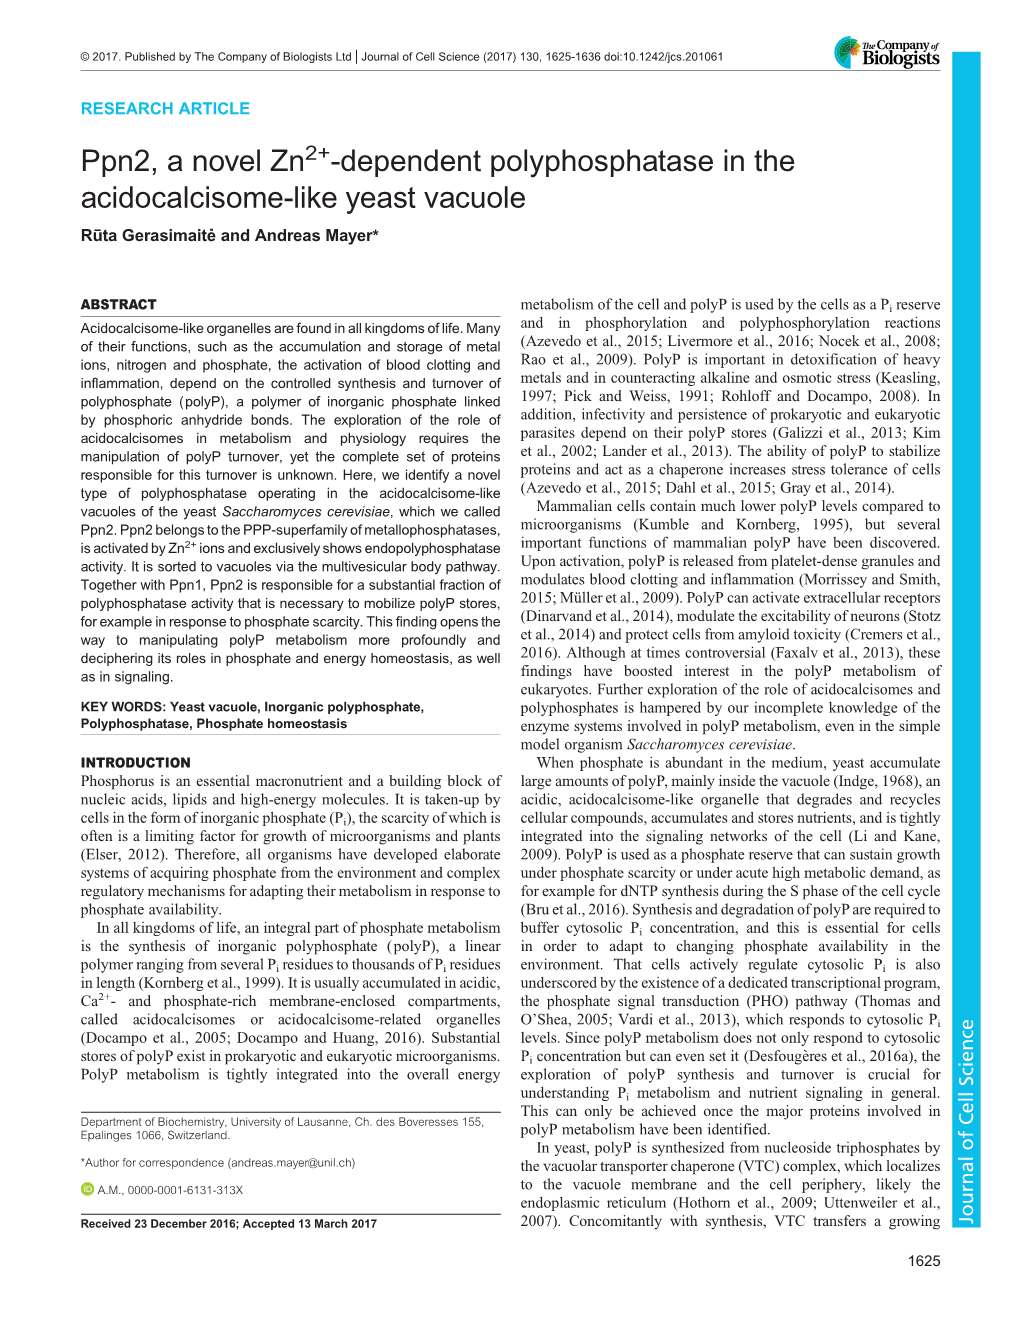 Ppn2, a Novel Zn2+-Dependent Polyphosphatase in the Acidocalcisome-Like Yeast Vacuole Rūta Gerasimaitėand Andreas Mayer*